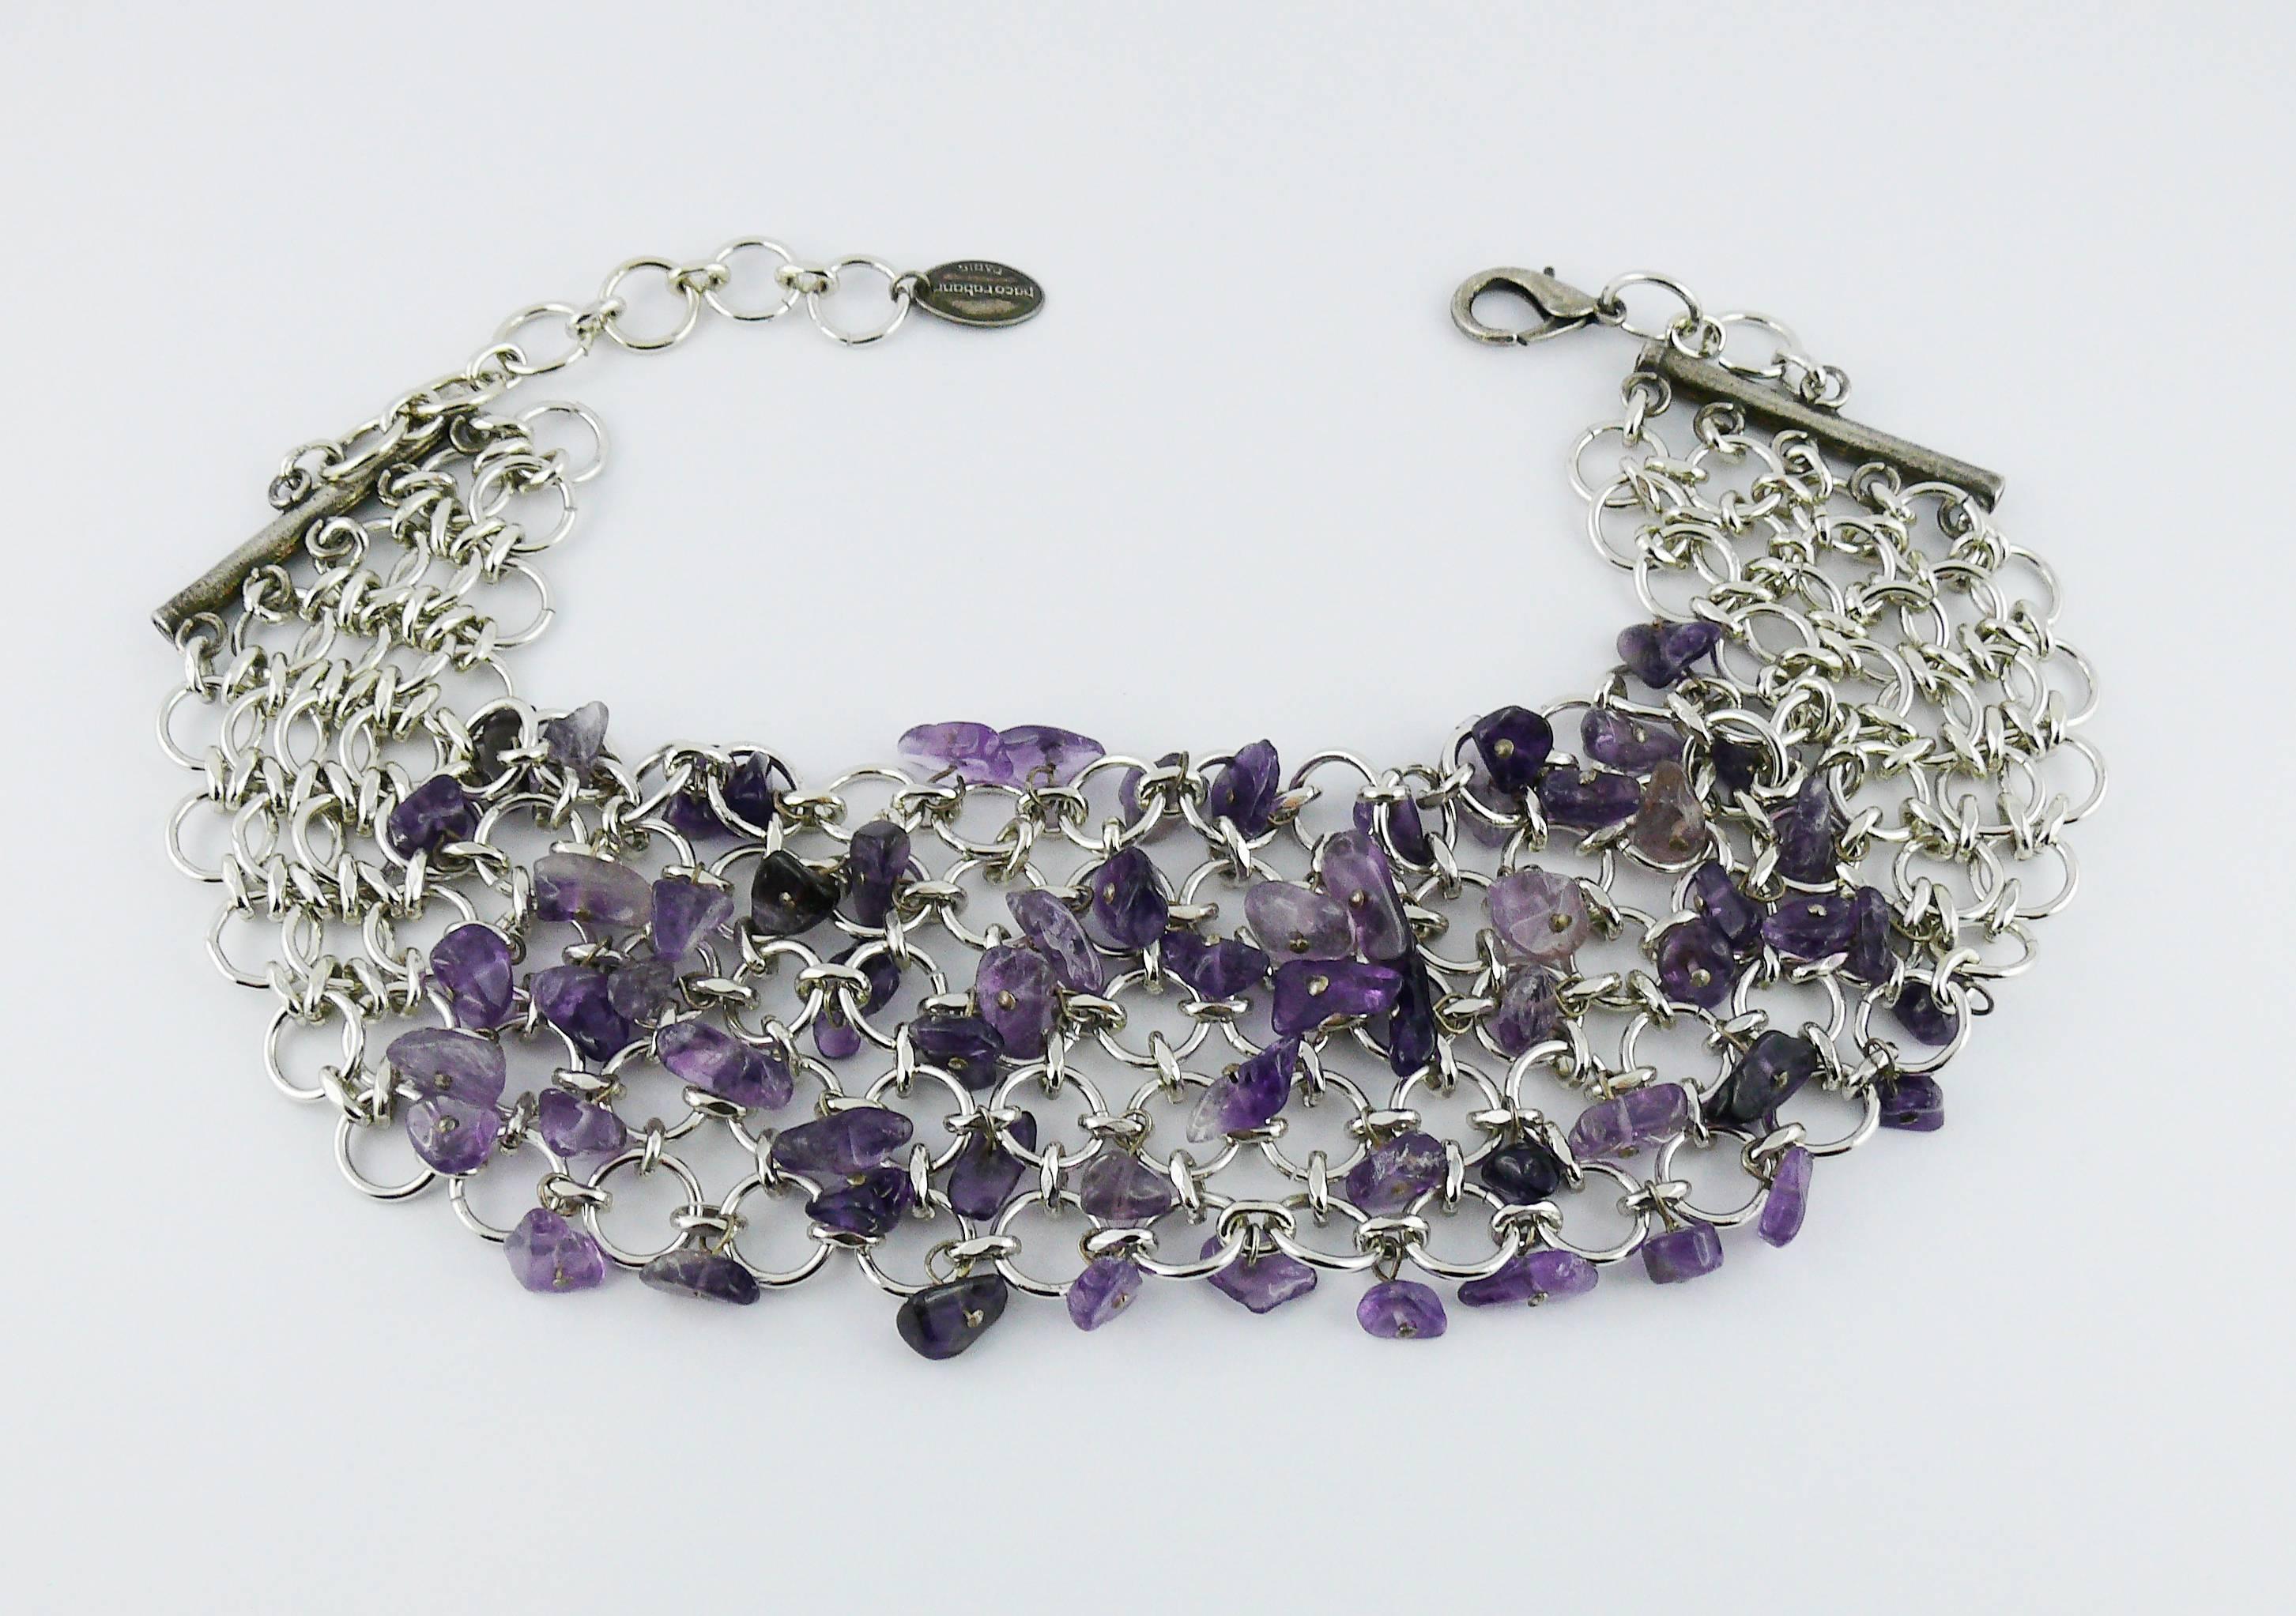 PACO RABANNE vintage choker necklace featuring a silver tone chainmail grid embellished with dangling purple quartz chips.

Lobster clasp closure.
Adjustable length with extension chain.

Marked PACO RABANNE Paris.

Indicative measurements : total